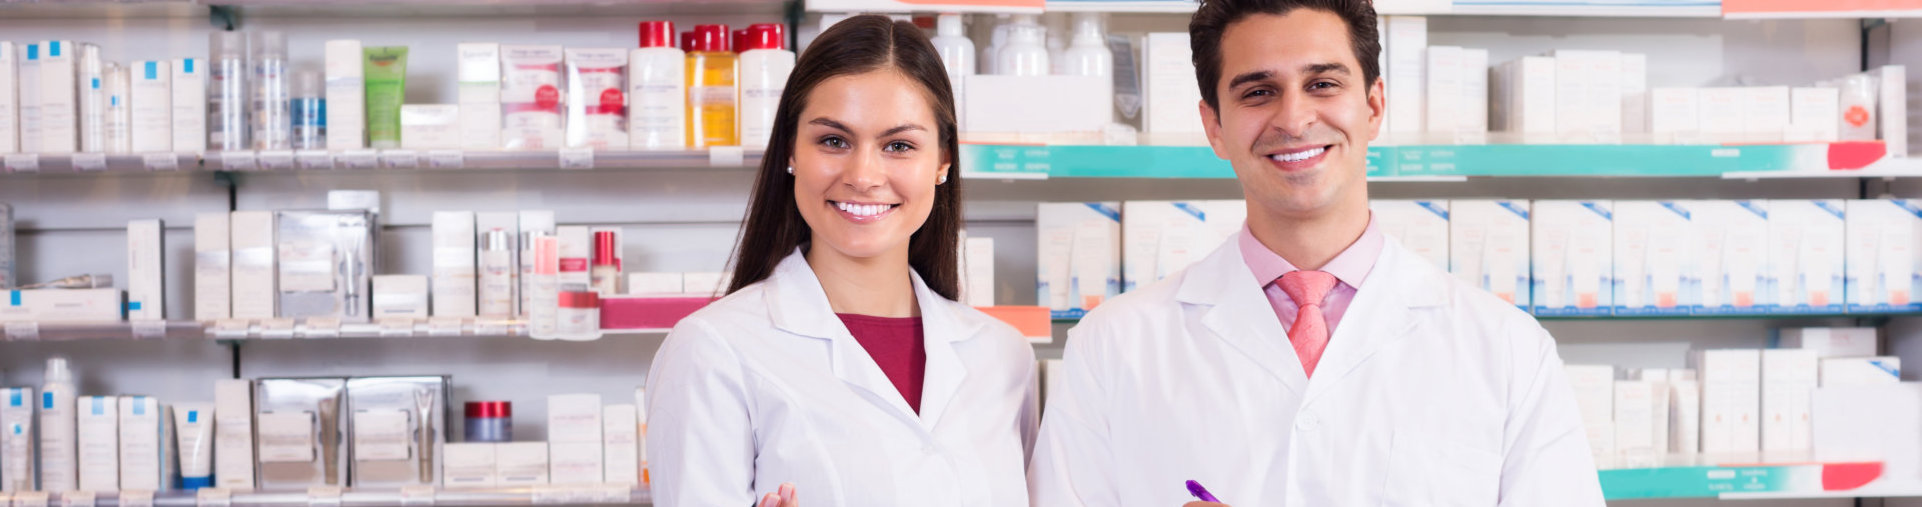 Pharmacy Technician - Medical Training Institute Of New York - College Of Healthcare Professionals - Ny